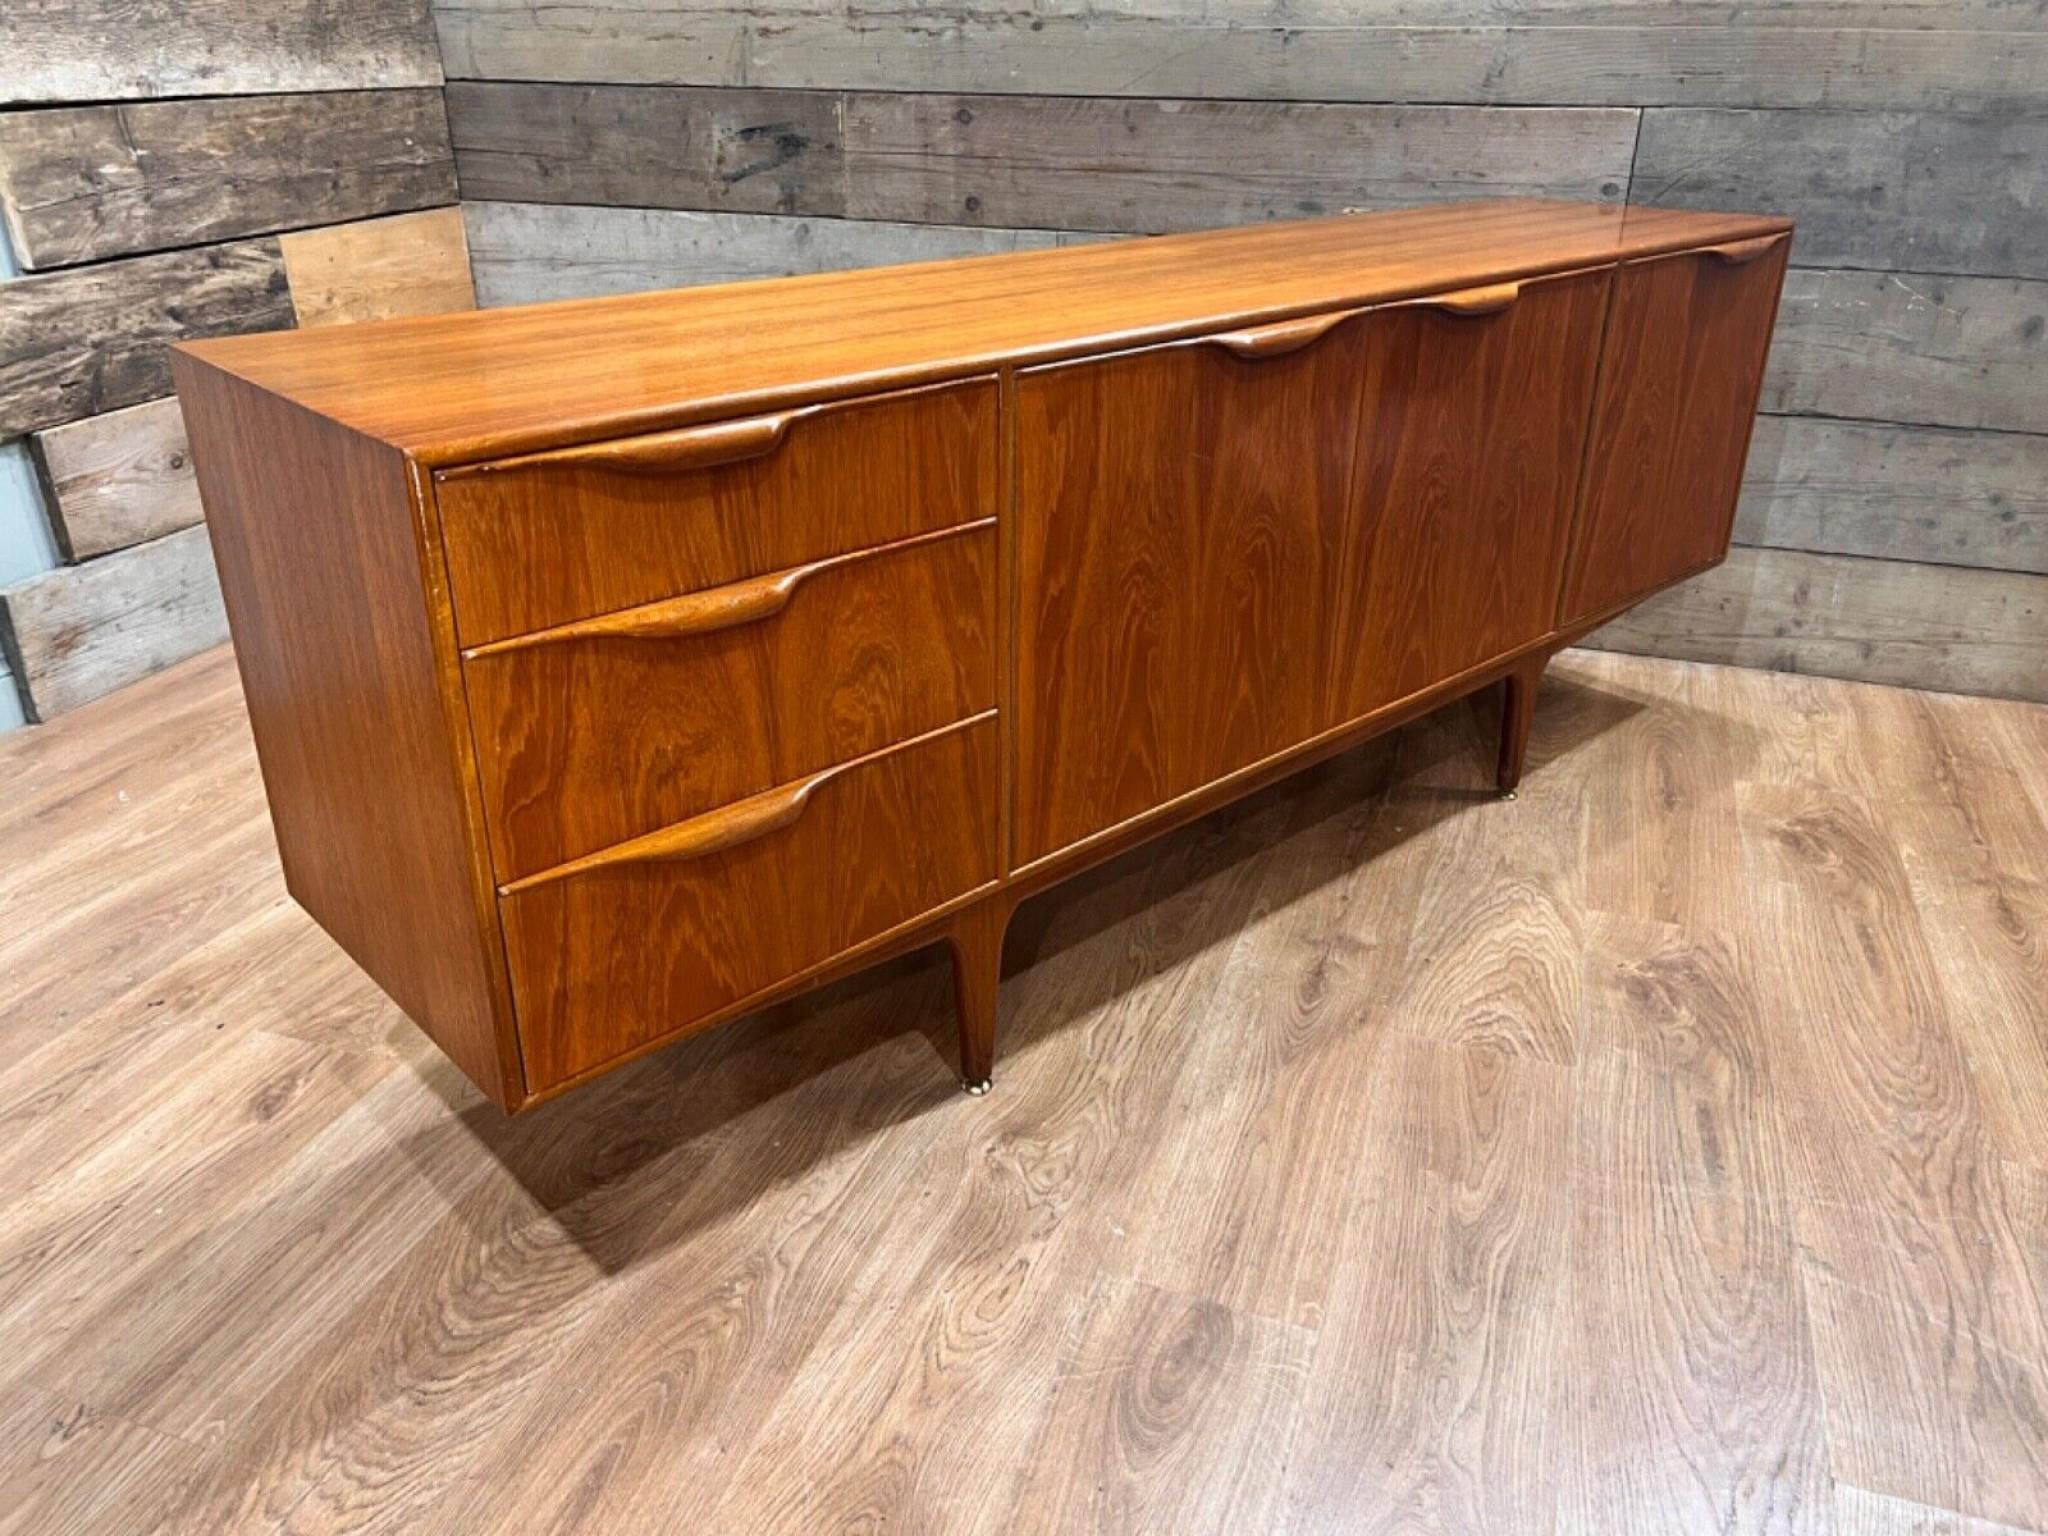 On trend 1960s Mid Century sideboard by AH McIntosh in the Danish style
Hand crafted from teak with a clean and minimal design
Opens out to reveal a lot of storage - three drawers, side hutch and central section
Offered in great shape ready for home